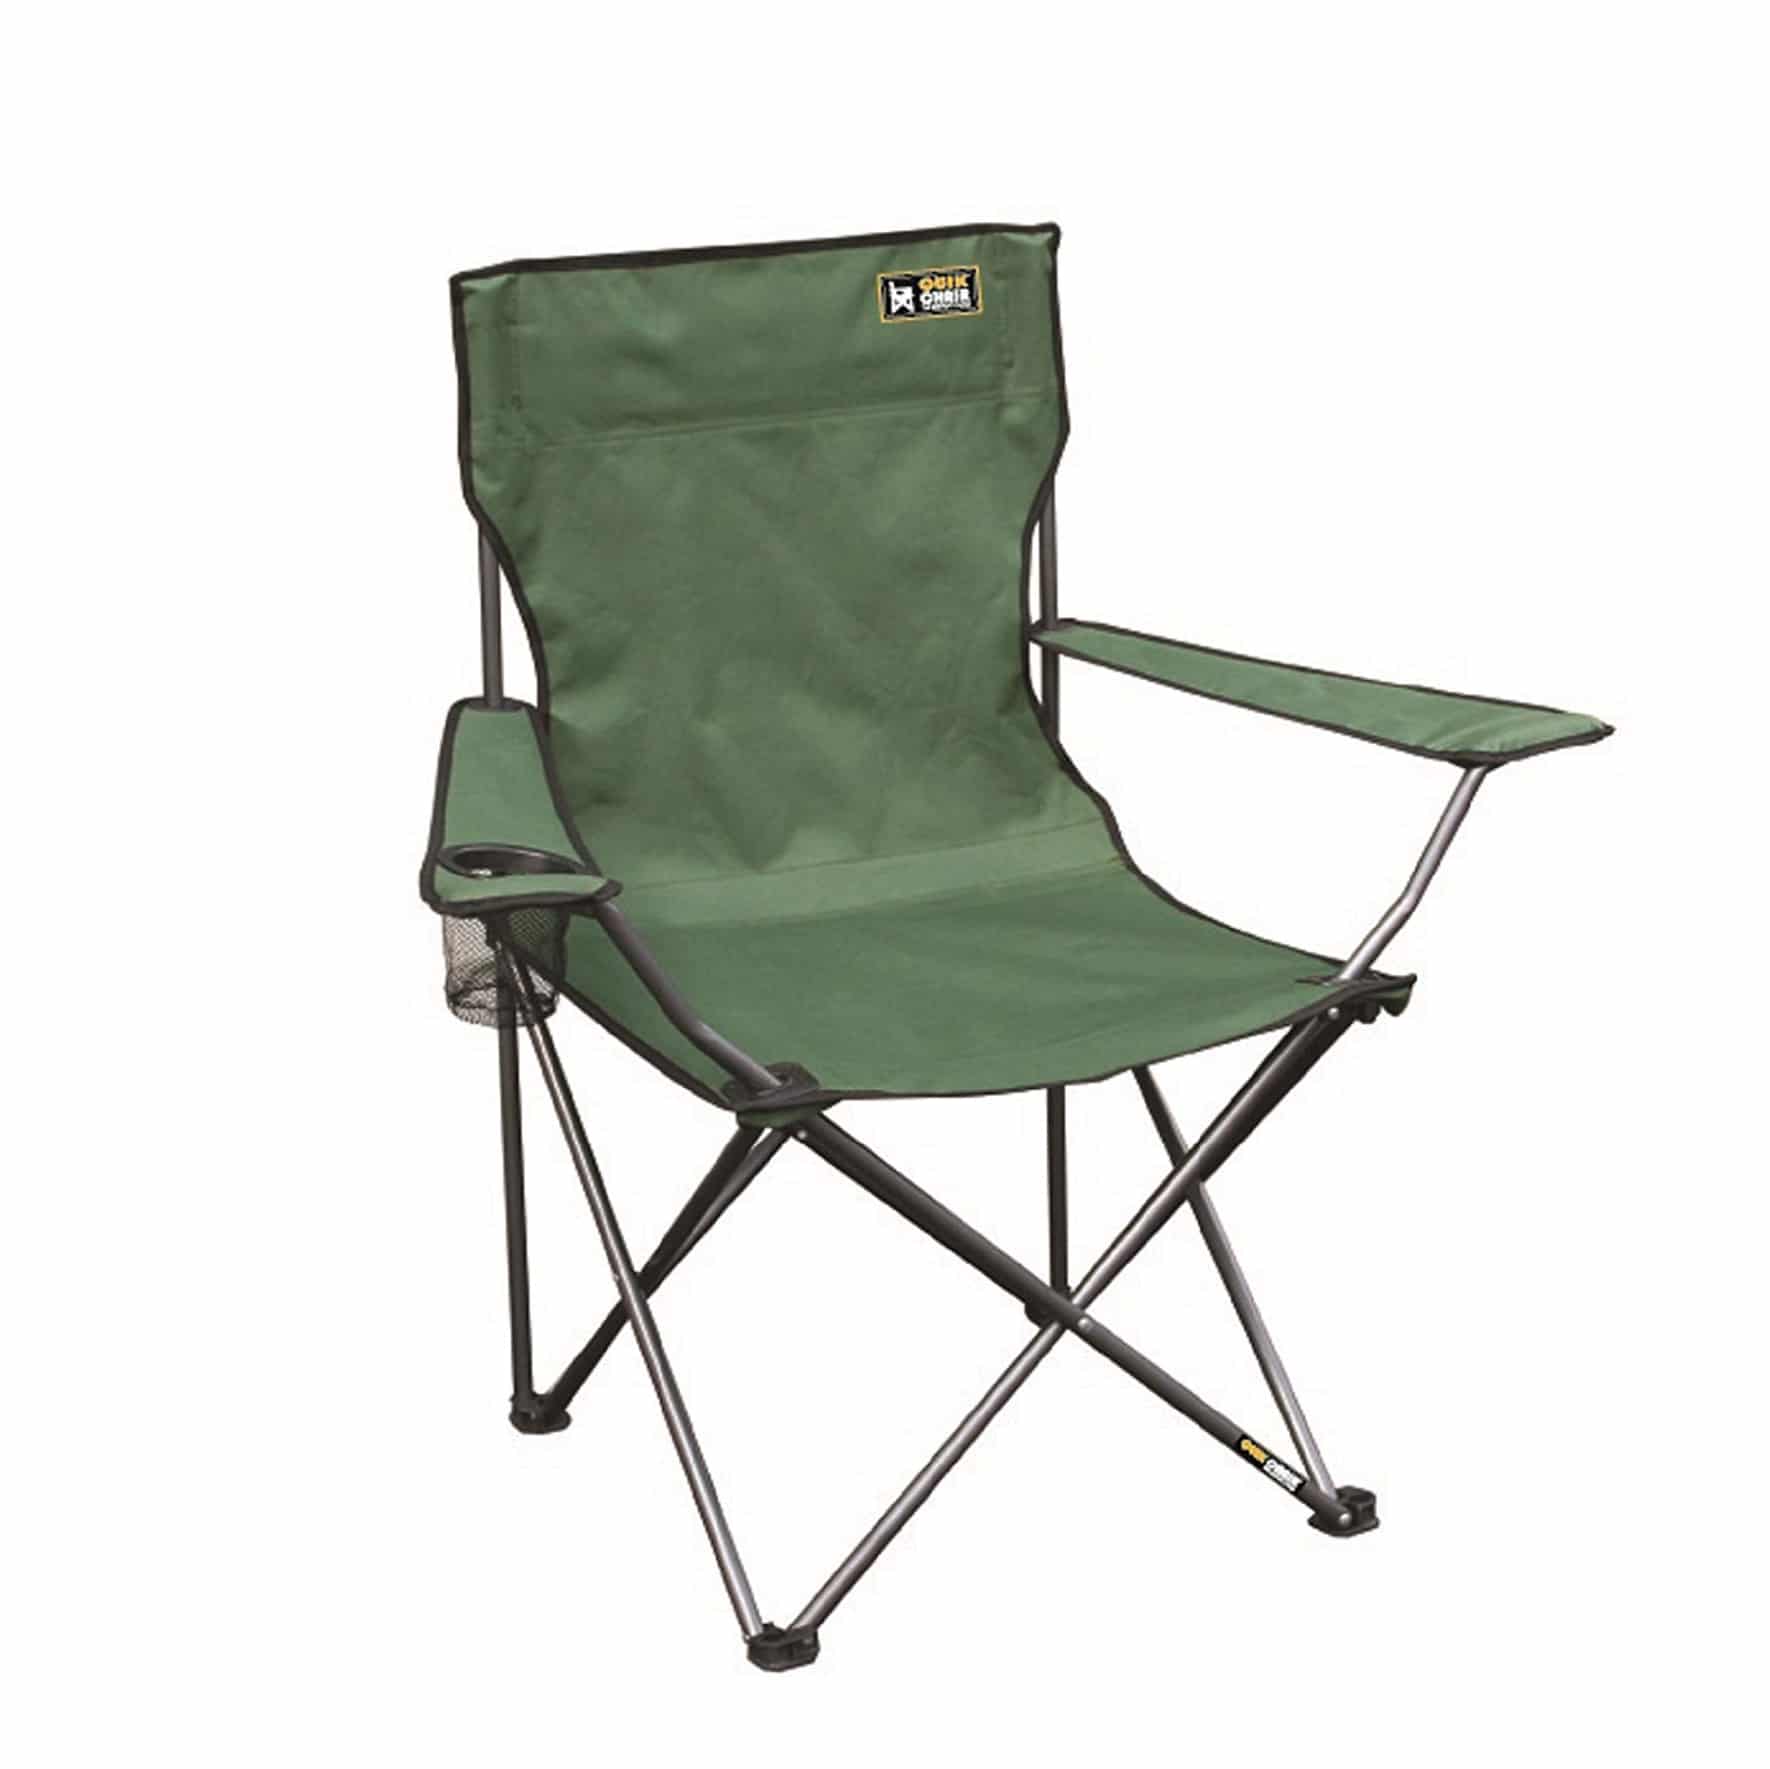 Top 10 Best Folding Camping Chairs in 2021 Review | Guide